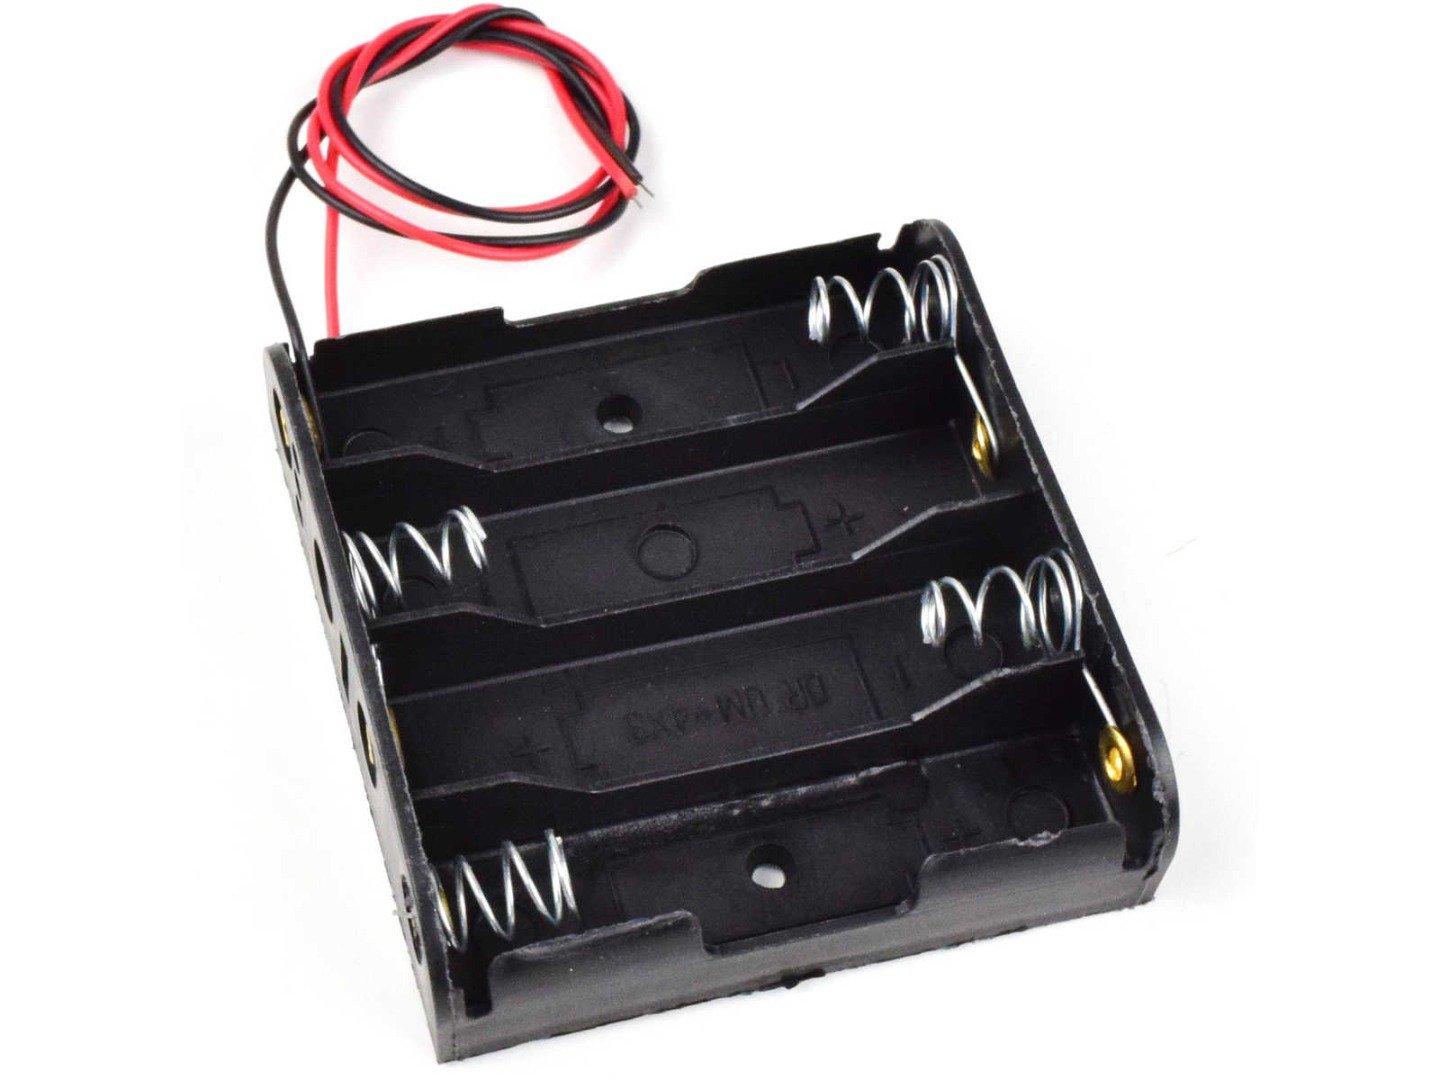 Battery Box Holder for 4x AA 1.5V Batteries, 25cm wires, open ends 10